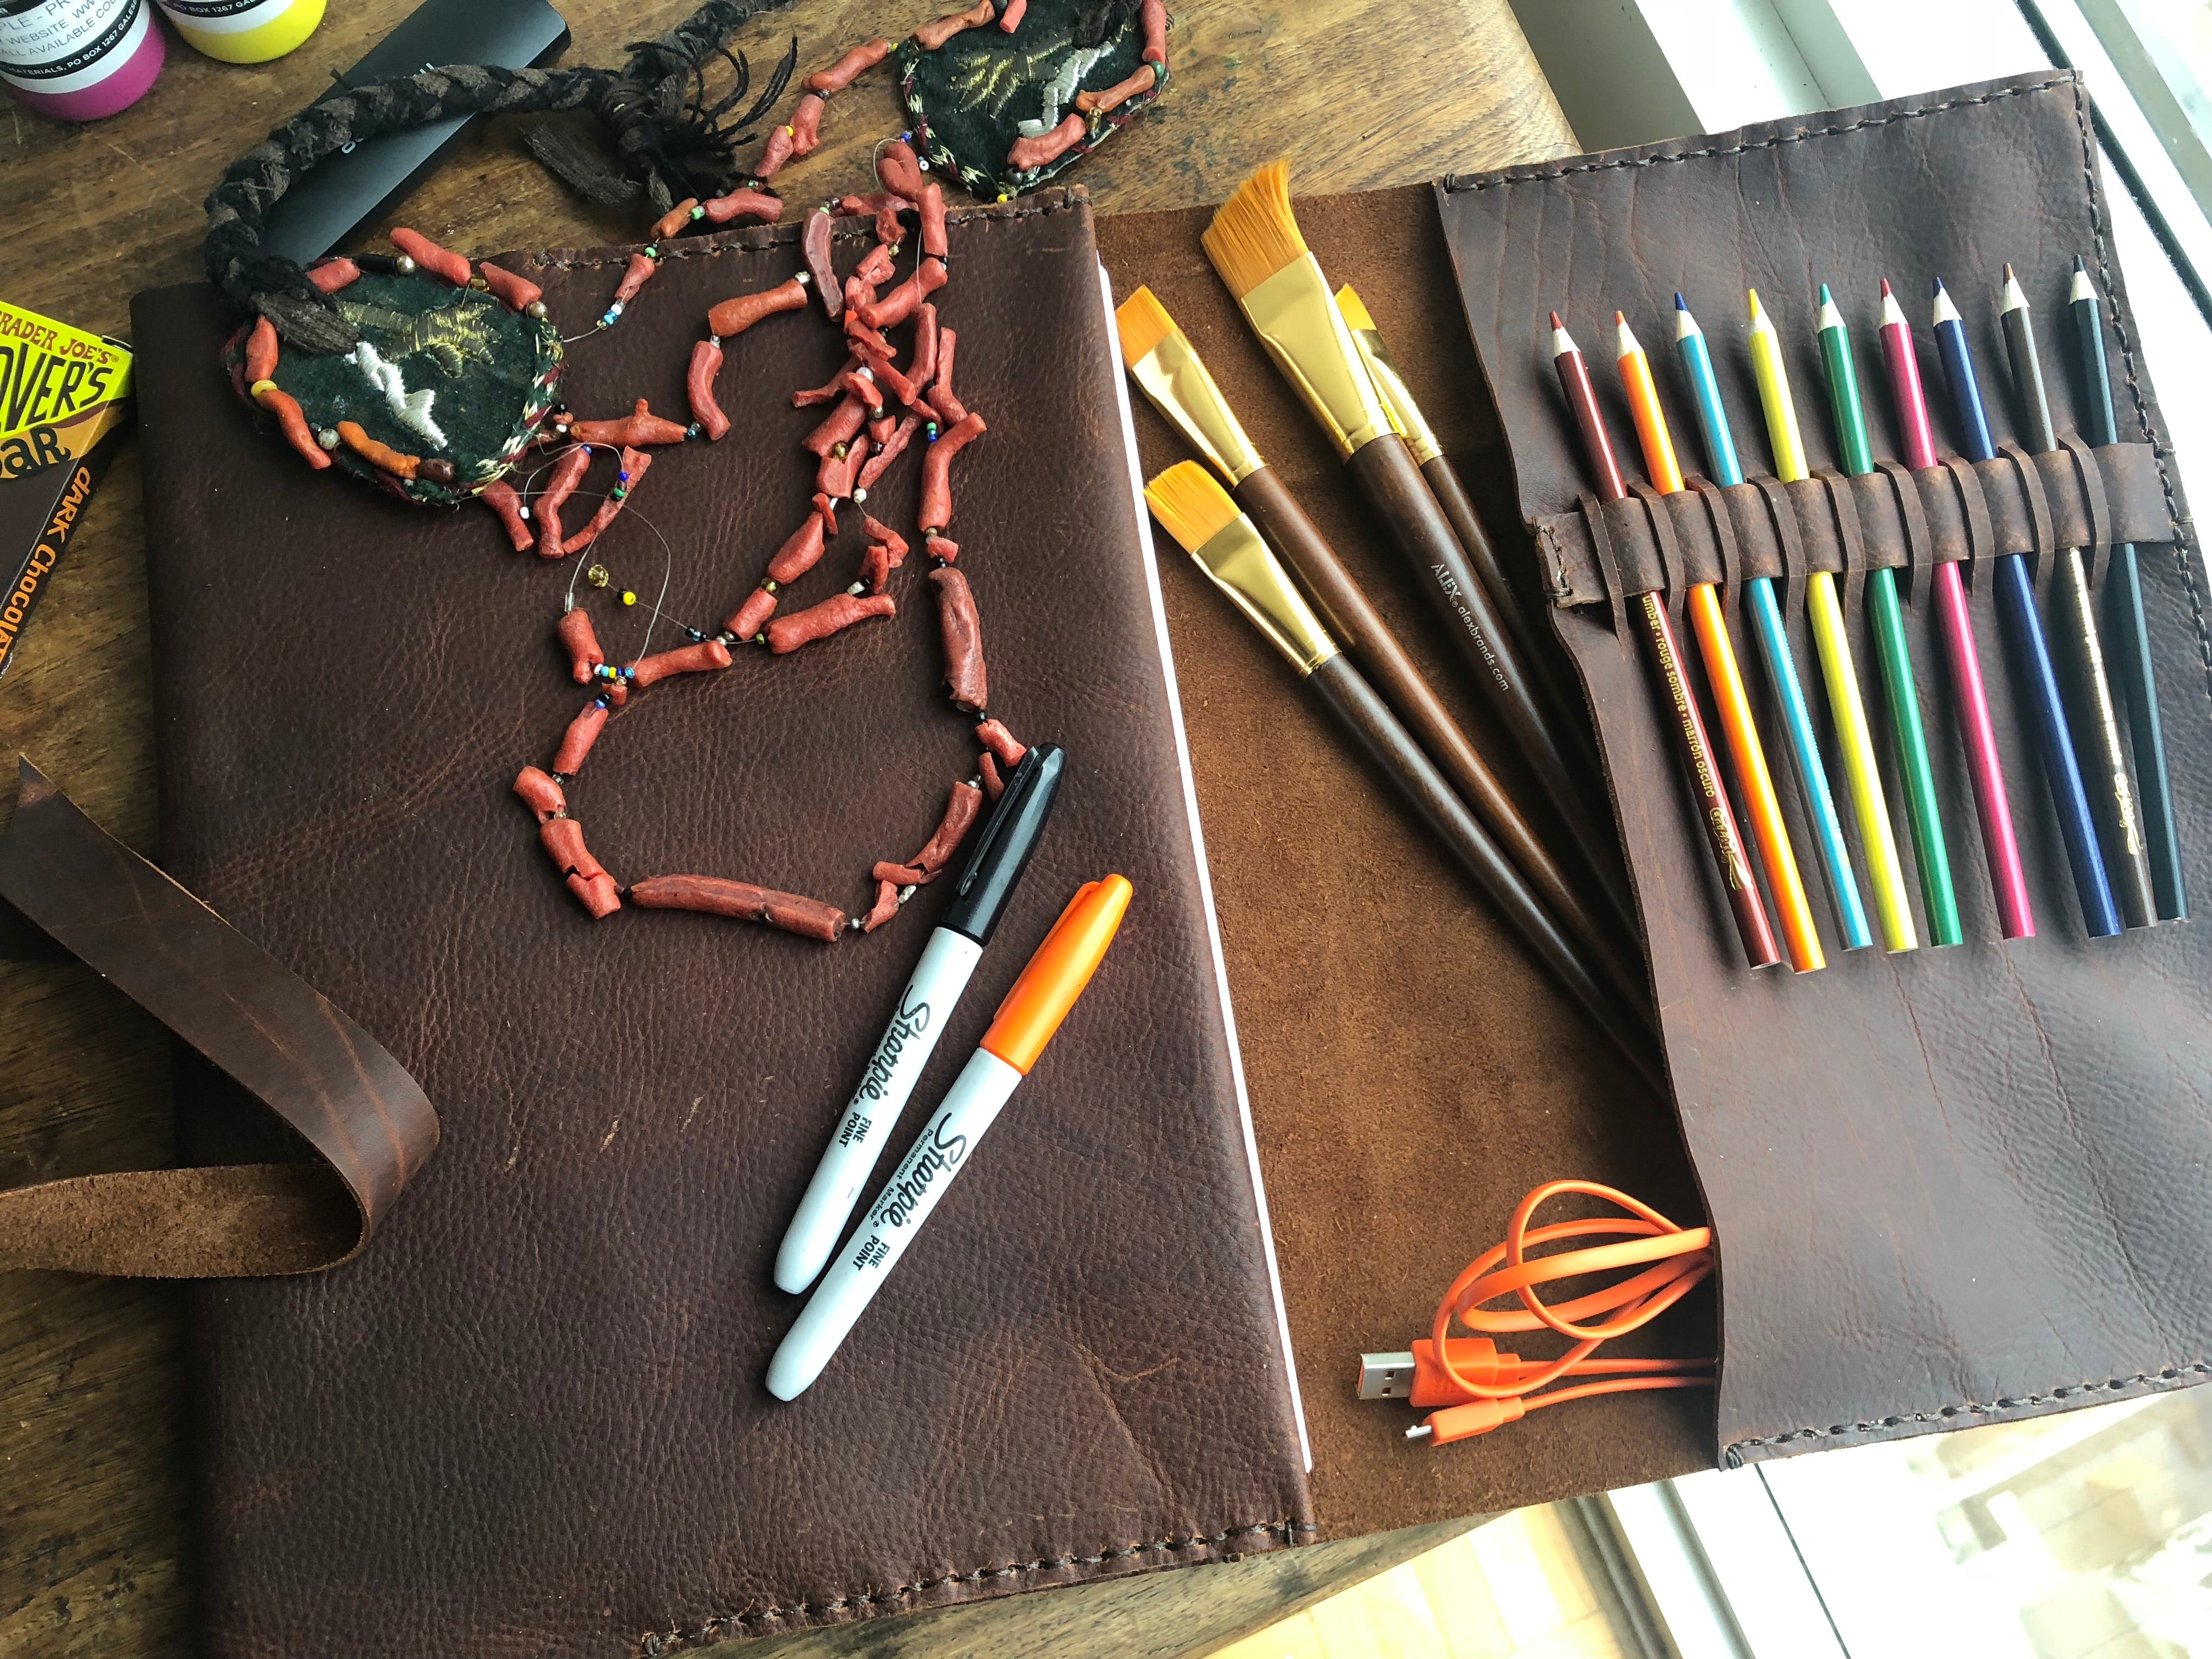 NY sketchbook, Refillable sketchpad cover, Hand-stitched leather sketc –  Luscious Leather NYC